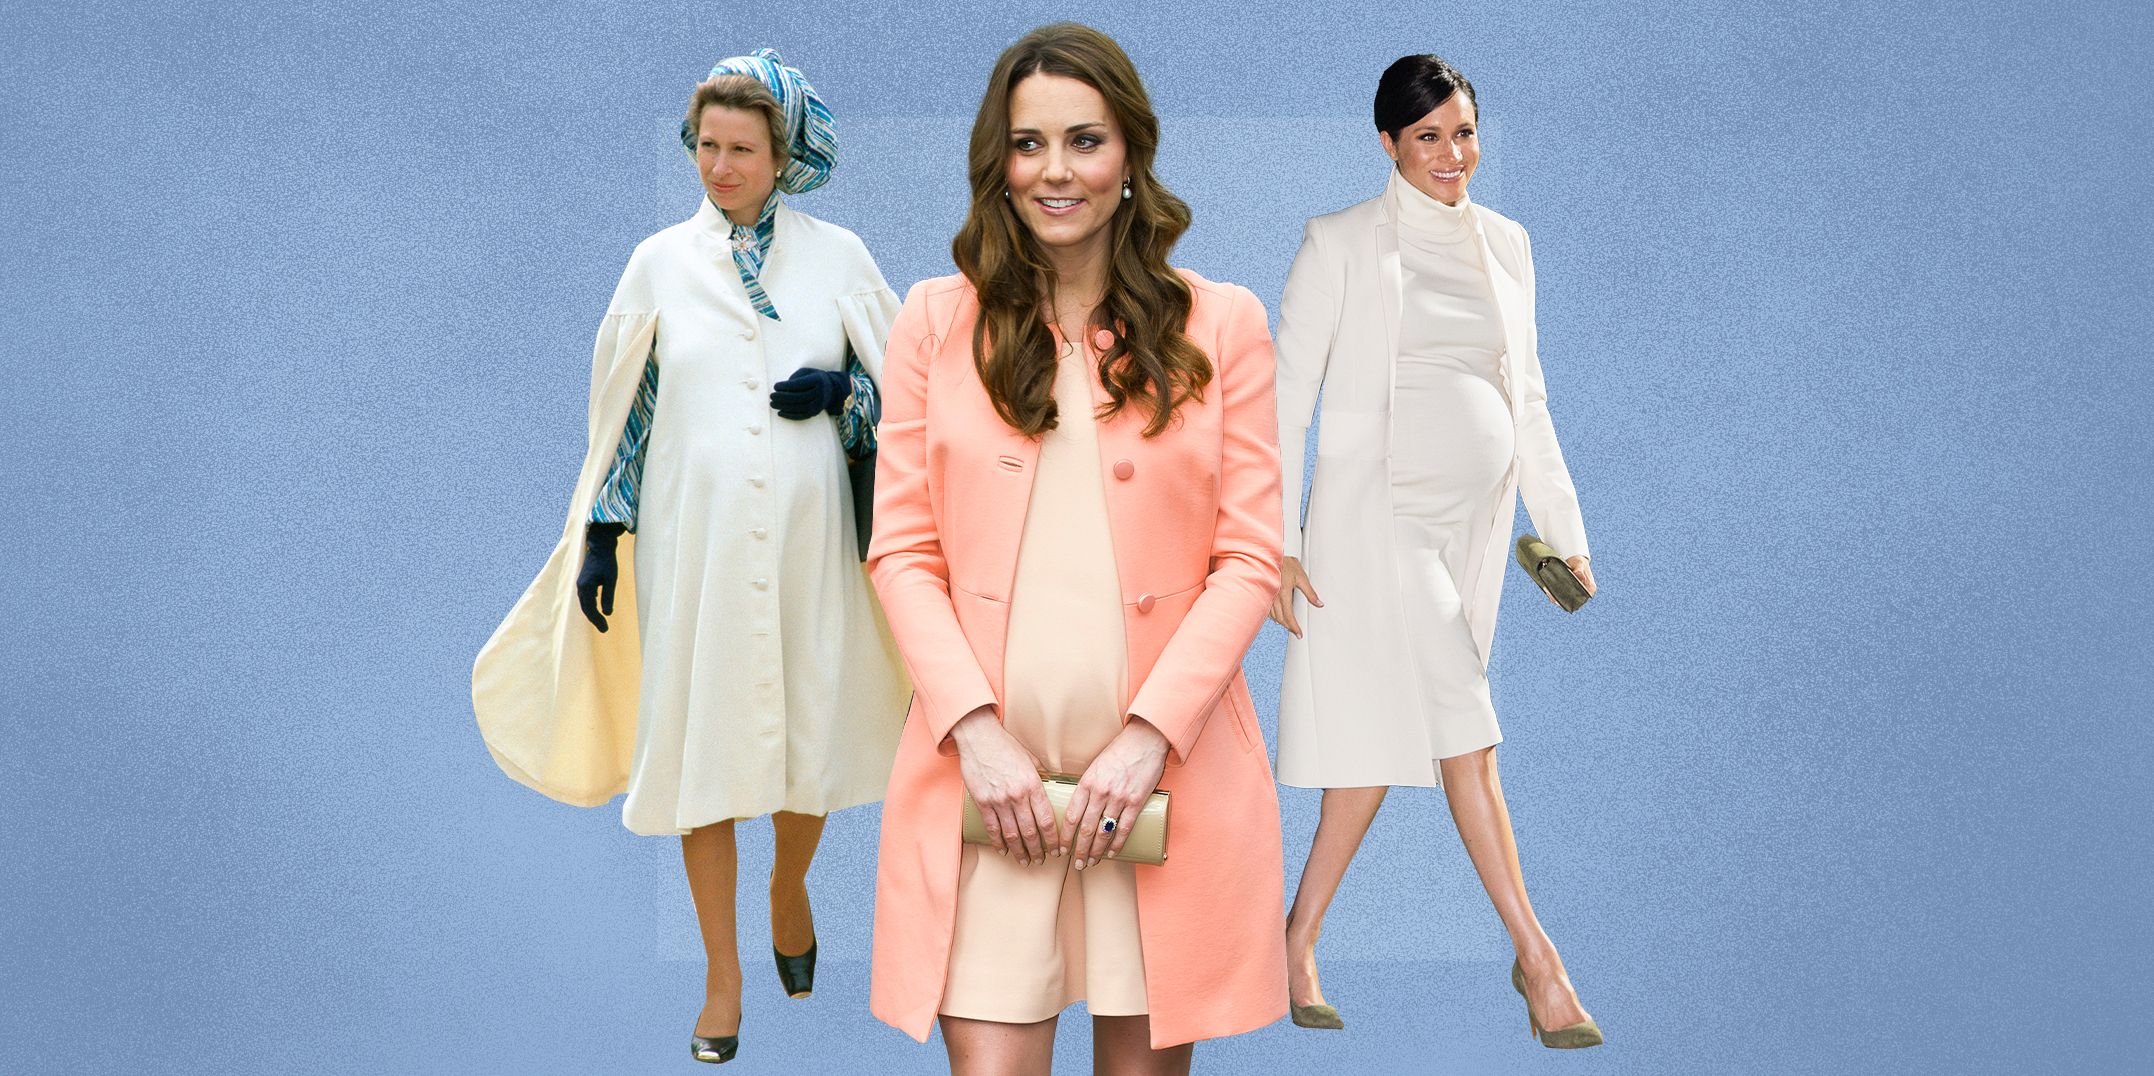 You don't need a whole new maternity wardrobe, says Hatch